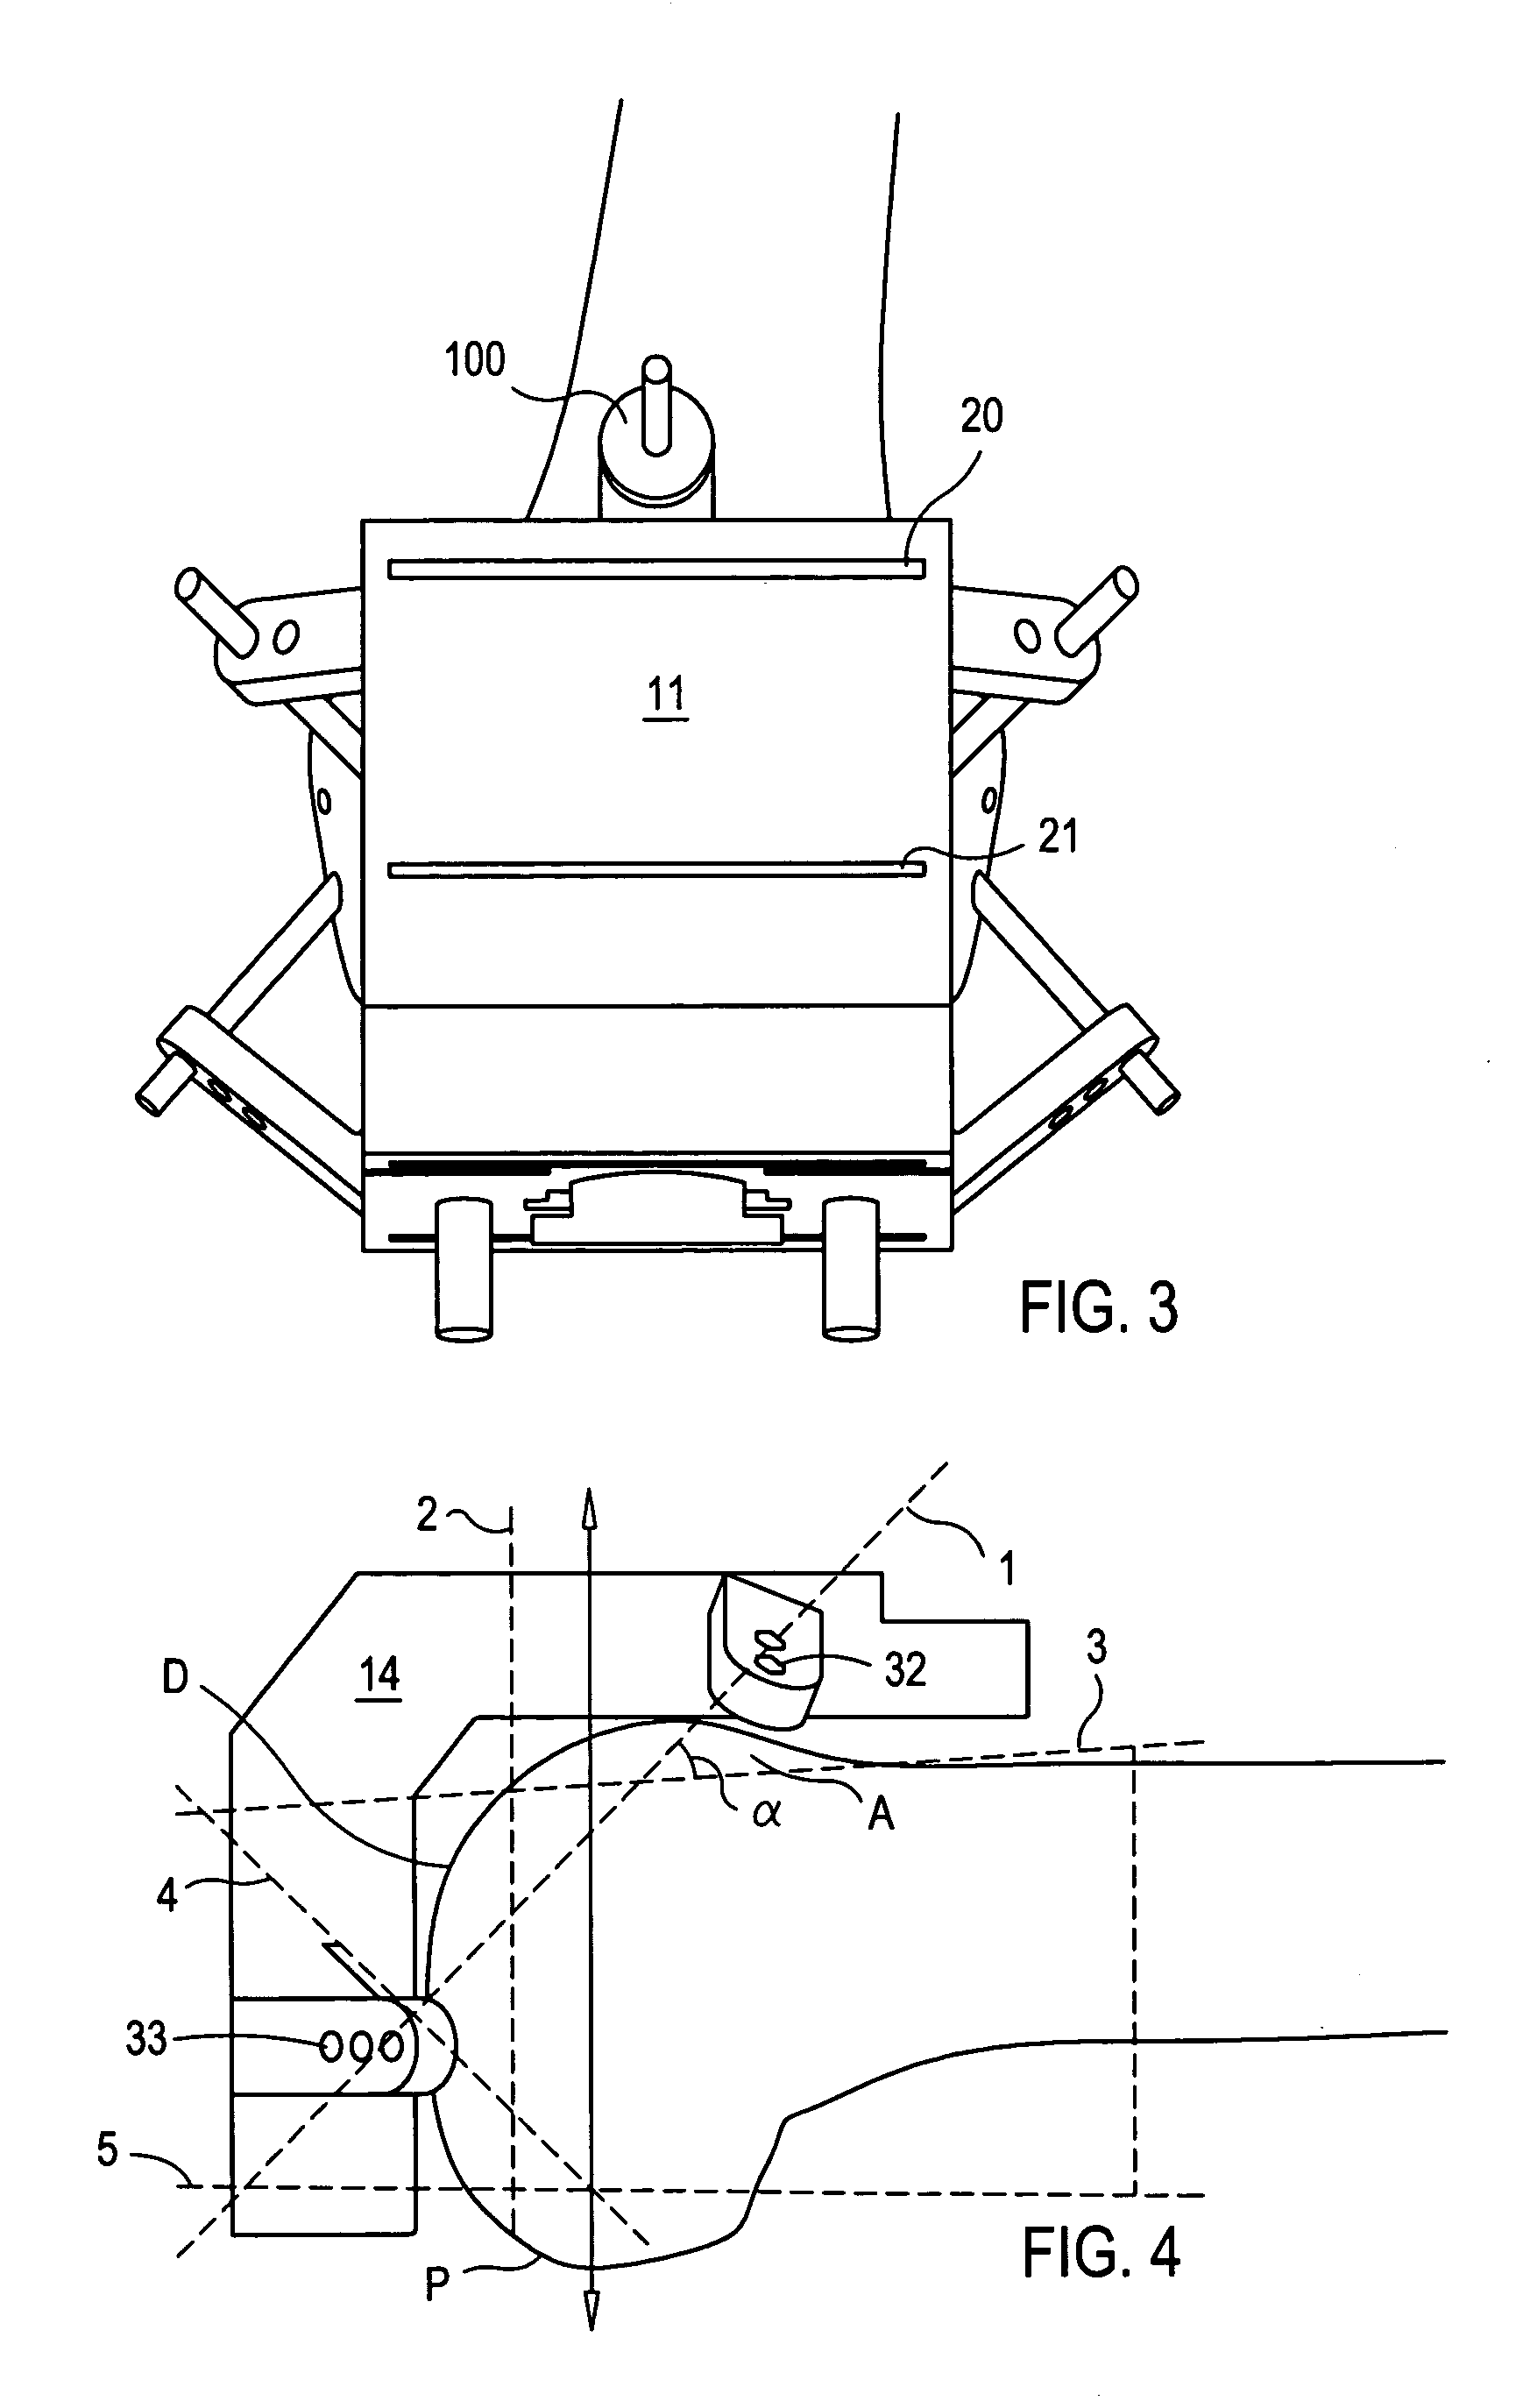 Cutting guide apparatus and surgical method for use in knee arthroplasty